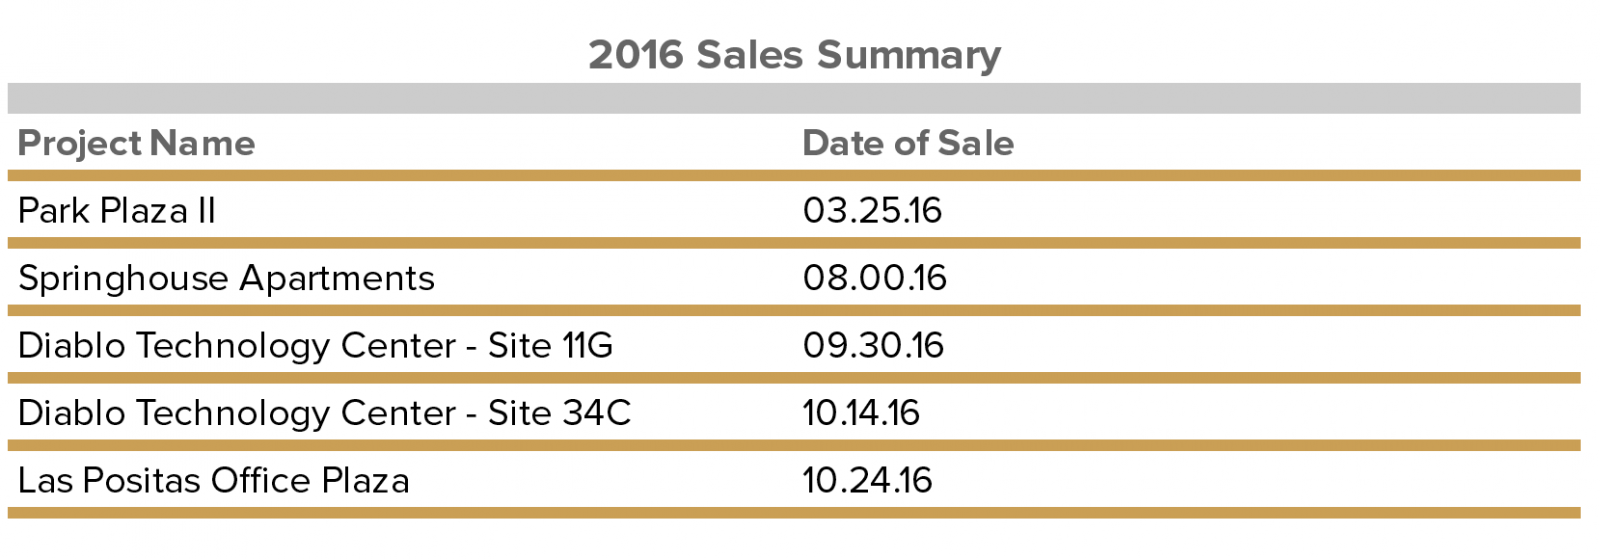 sales-summary-january-2017.png